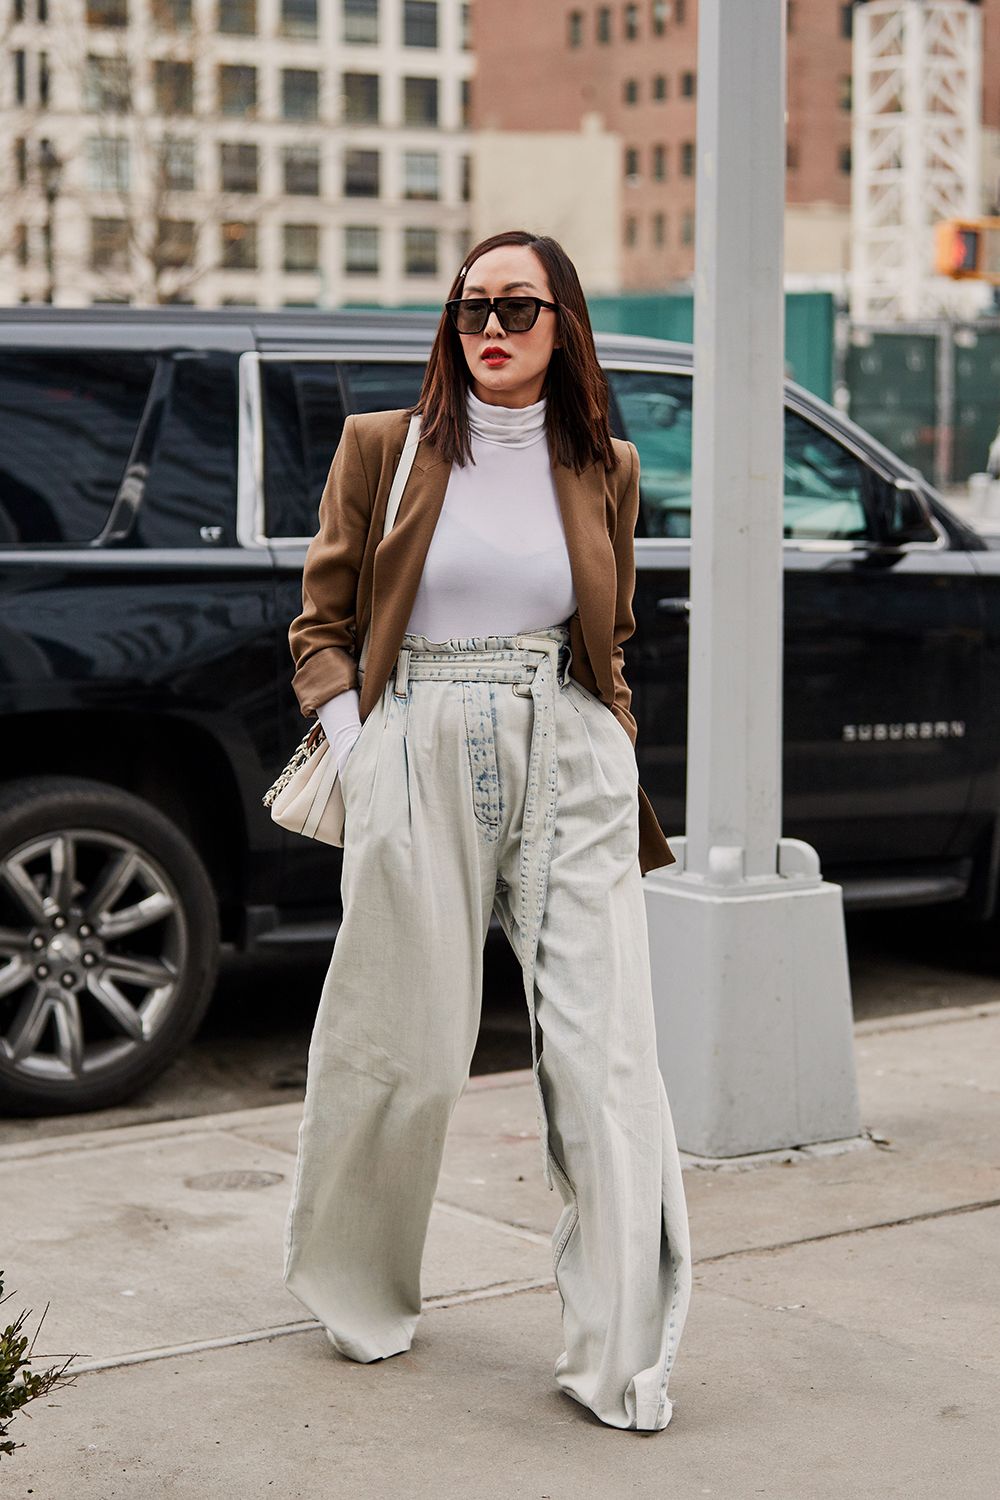 Pleated Jeans Are Officially the Biggest Denim Trend of 2019 | Who What ...